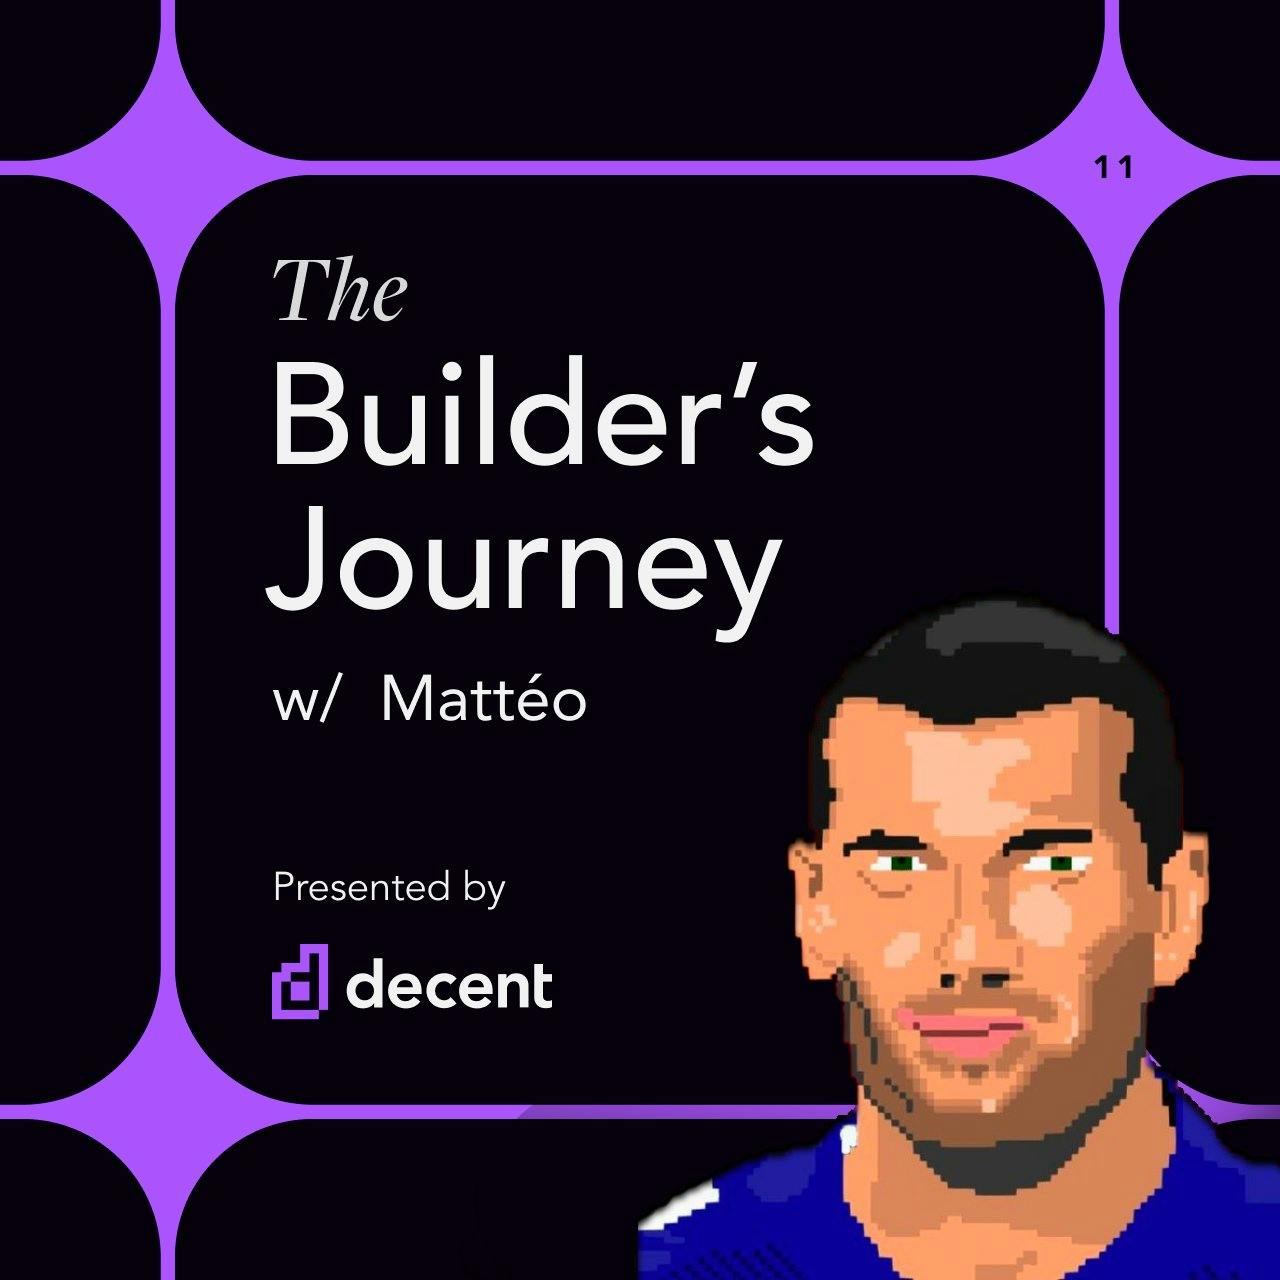 On this episode of the Builder's Journey, we chatted with Mattéo Georges, CEO of Astraly. Astraly is an organization developing on-chain reputation primitives and a reputation-based token distribution platform on StarkNet. Mattéo discusses his journey into Web3 and founding a team, the use cases behind on-chain reputation, and what it's like building on StarkNet for the future.